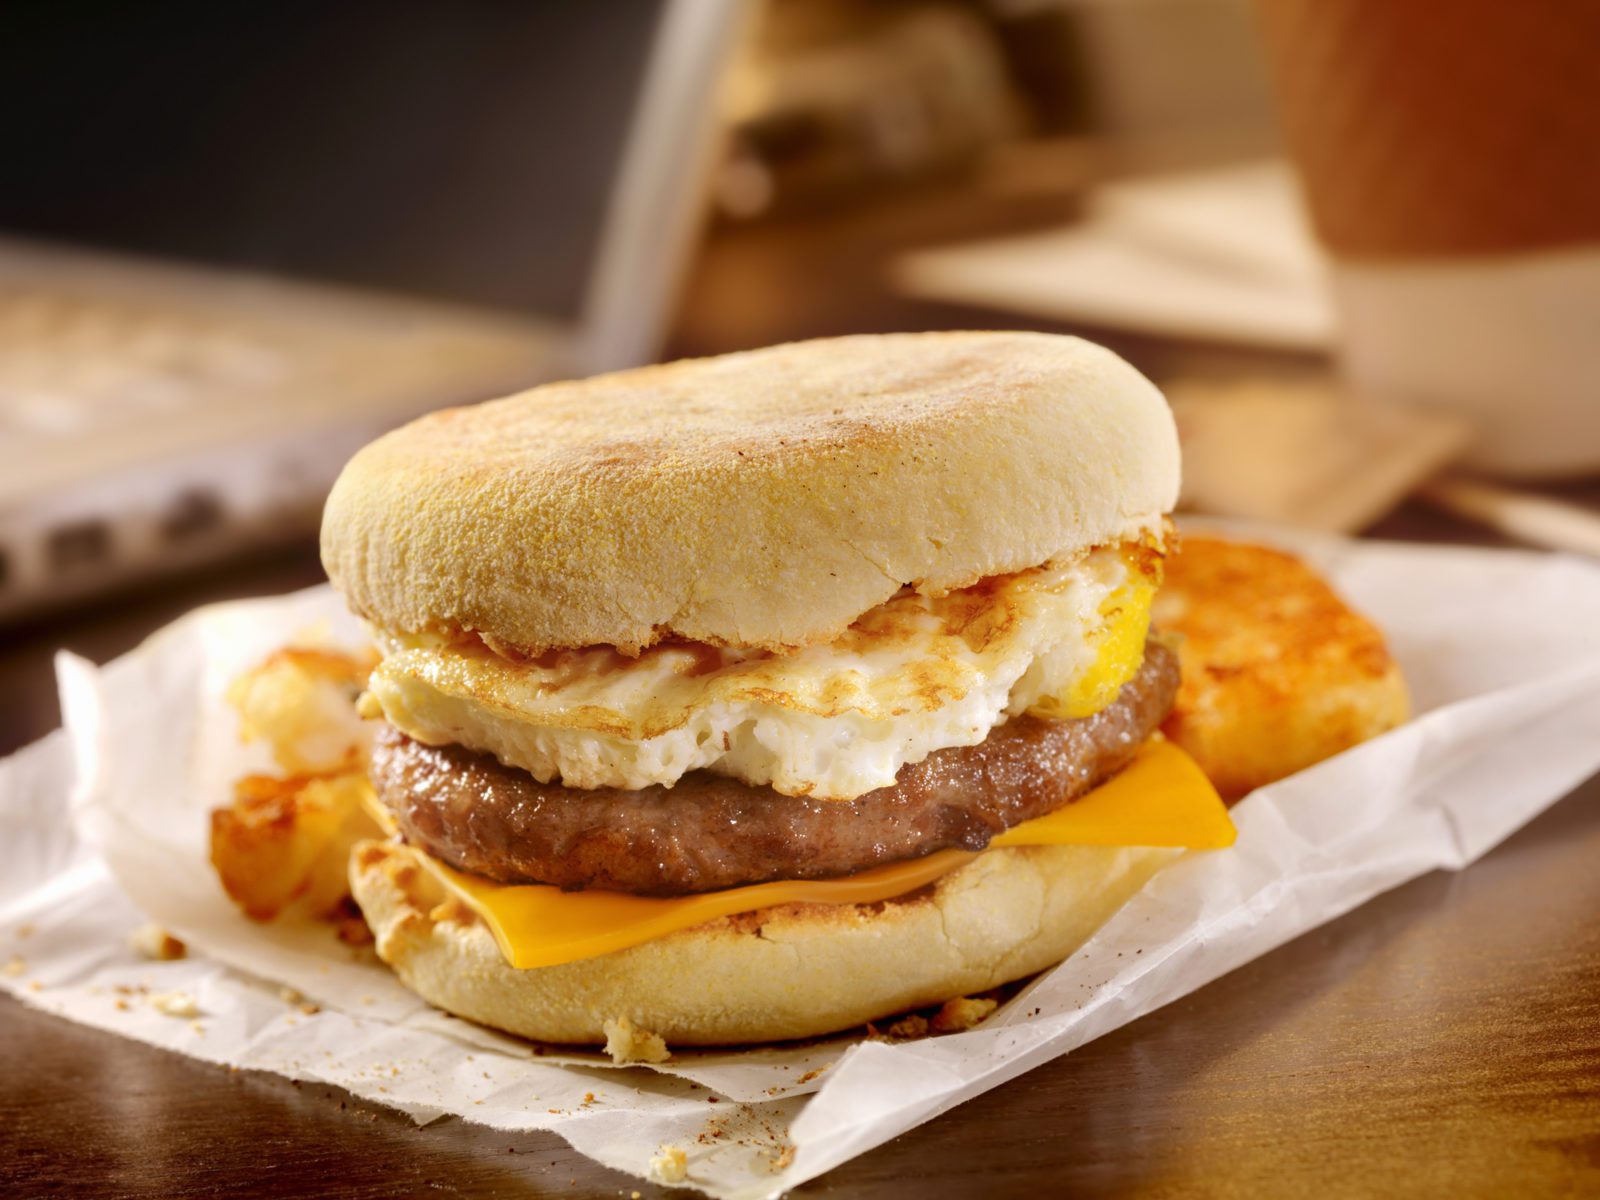 Snag a made-to-order hot breakfast sandwich from beach java cafe.